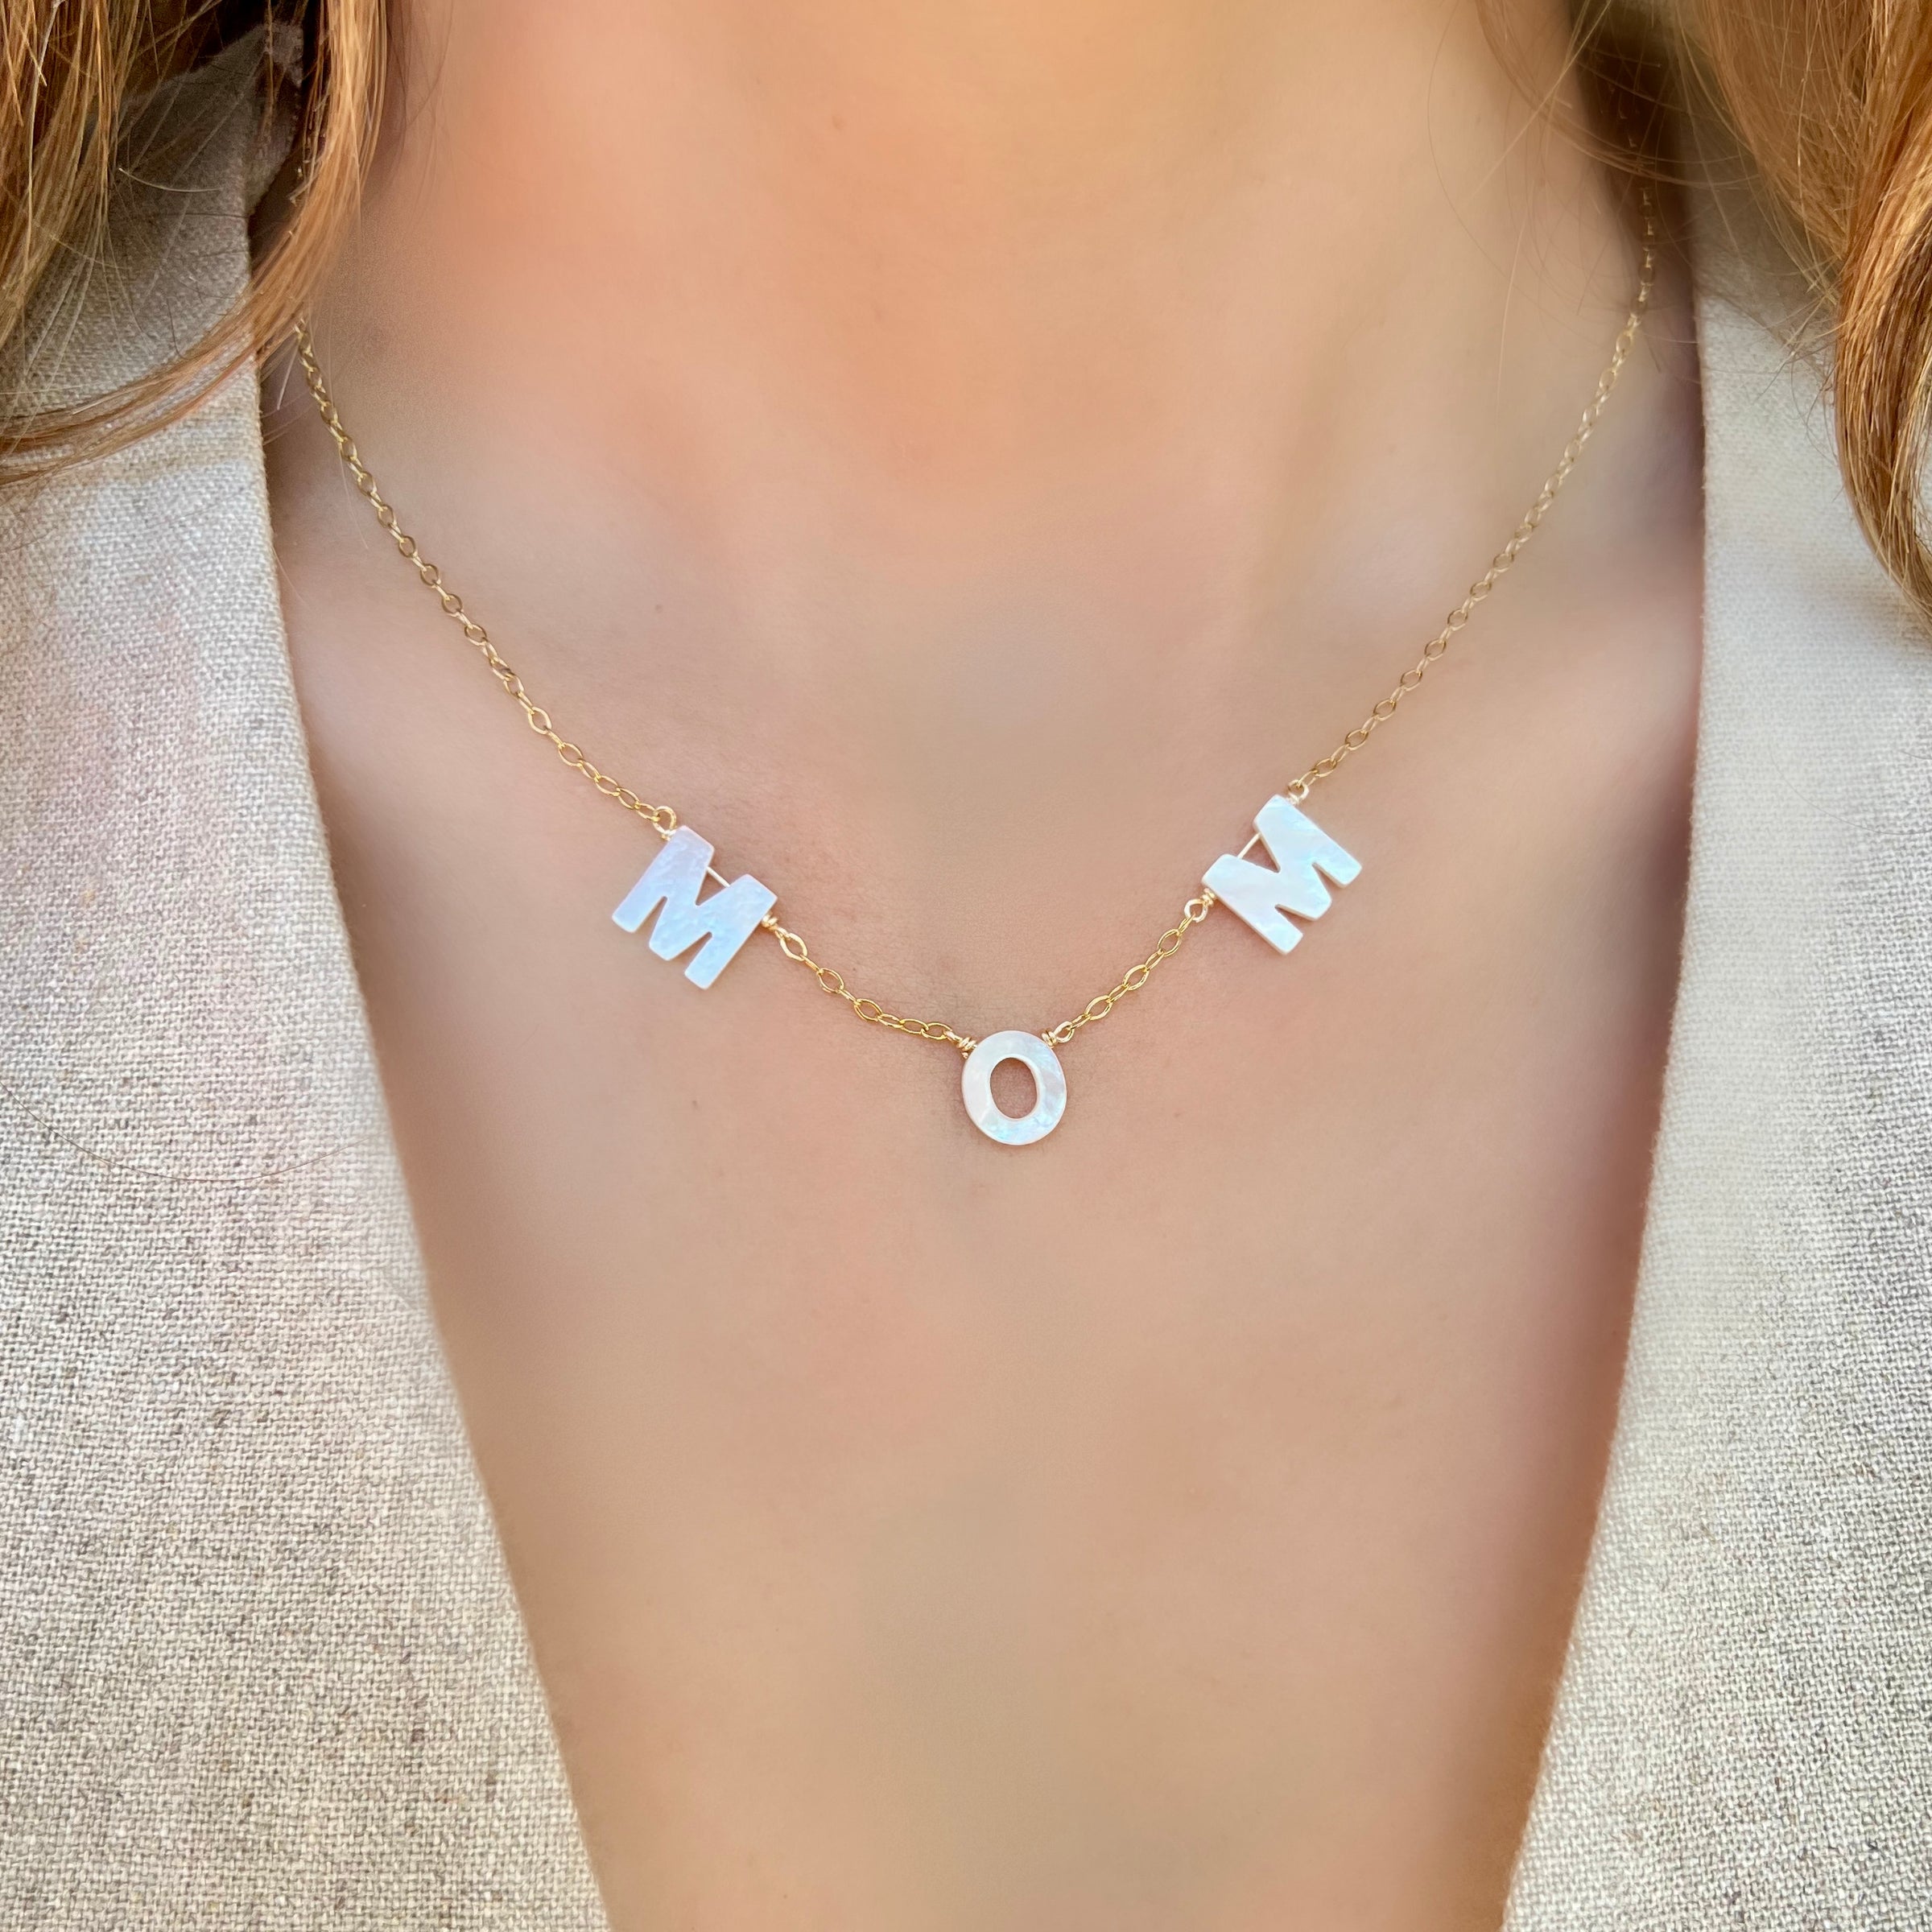 Mom Necklace